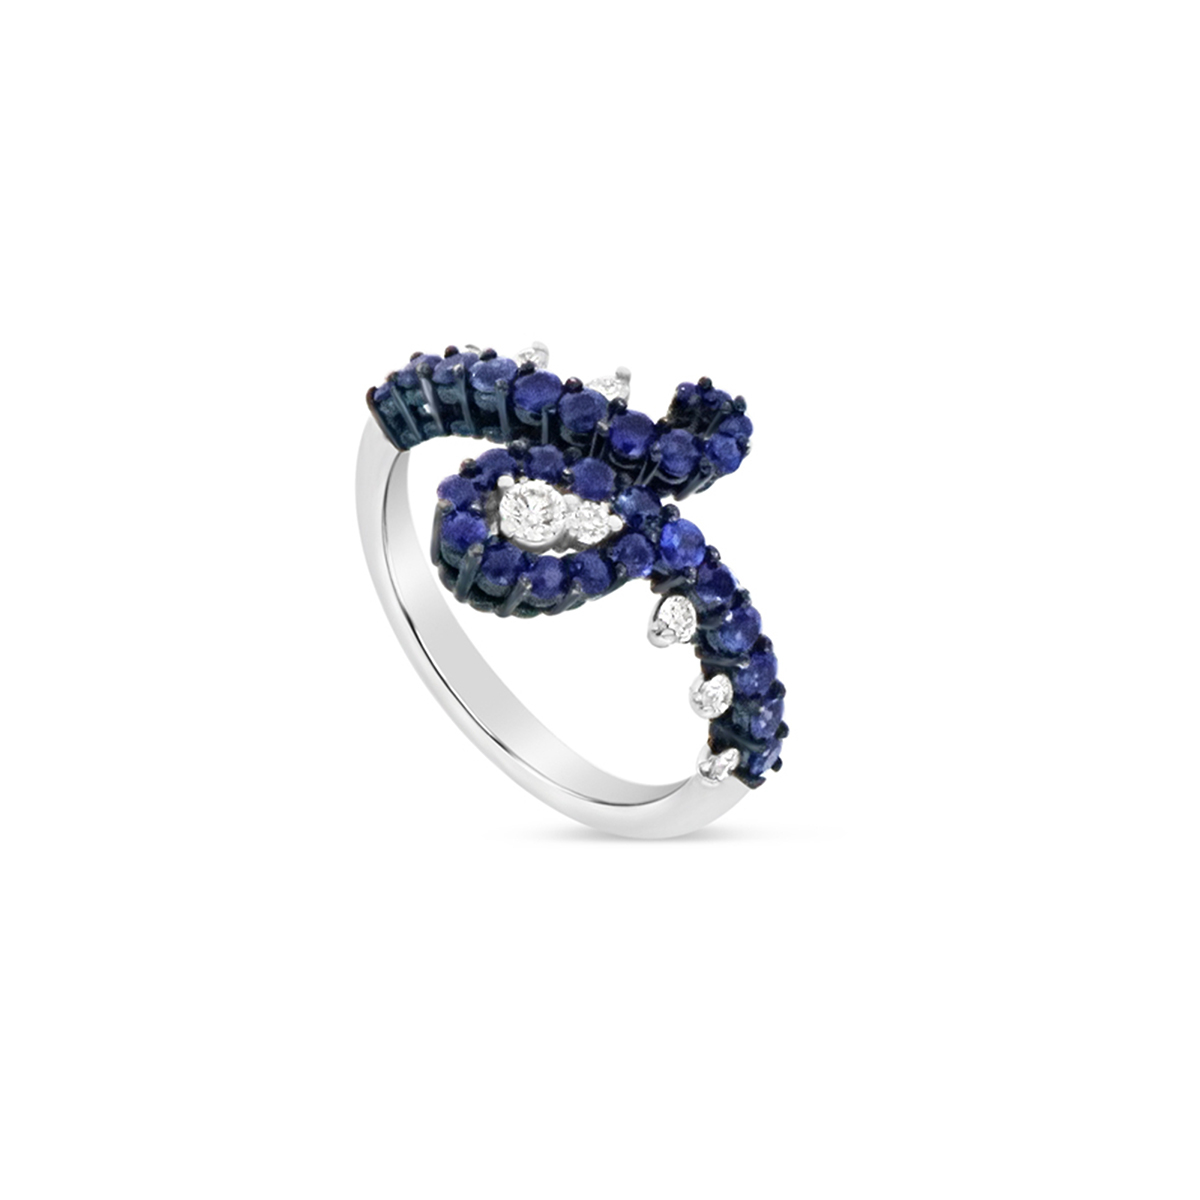 Sapphire and Diamond Ring in 18K White Gold - 